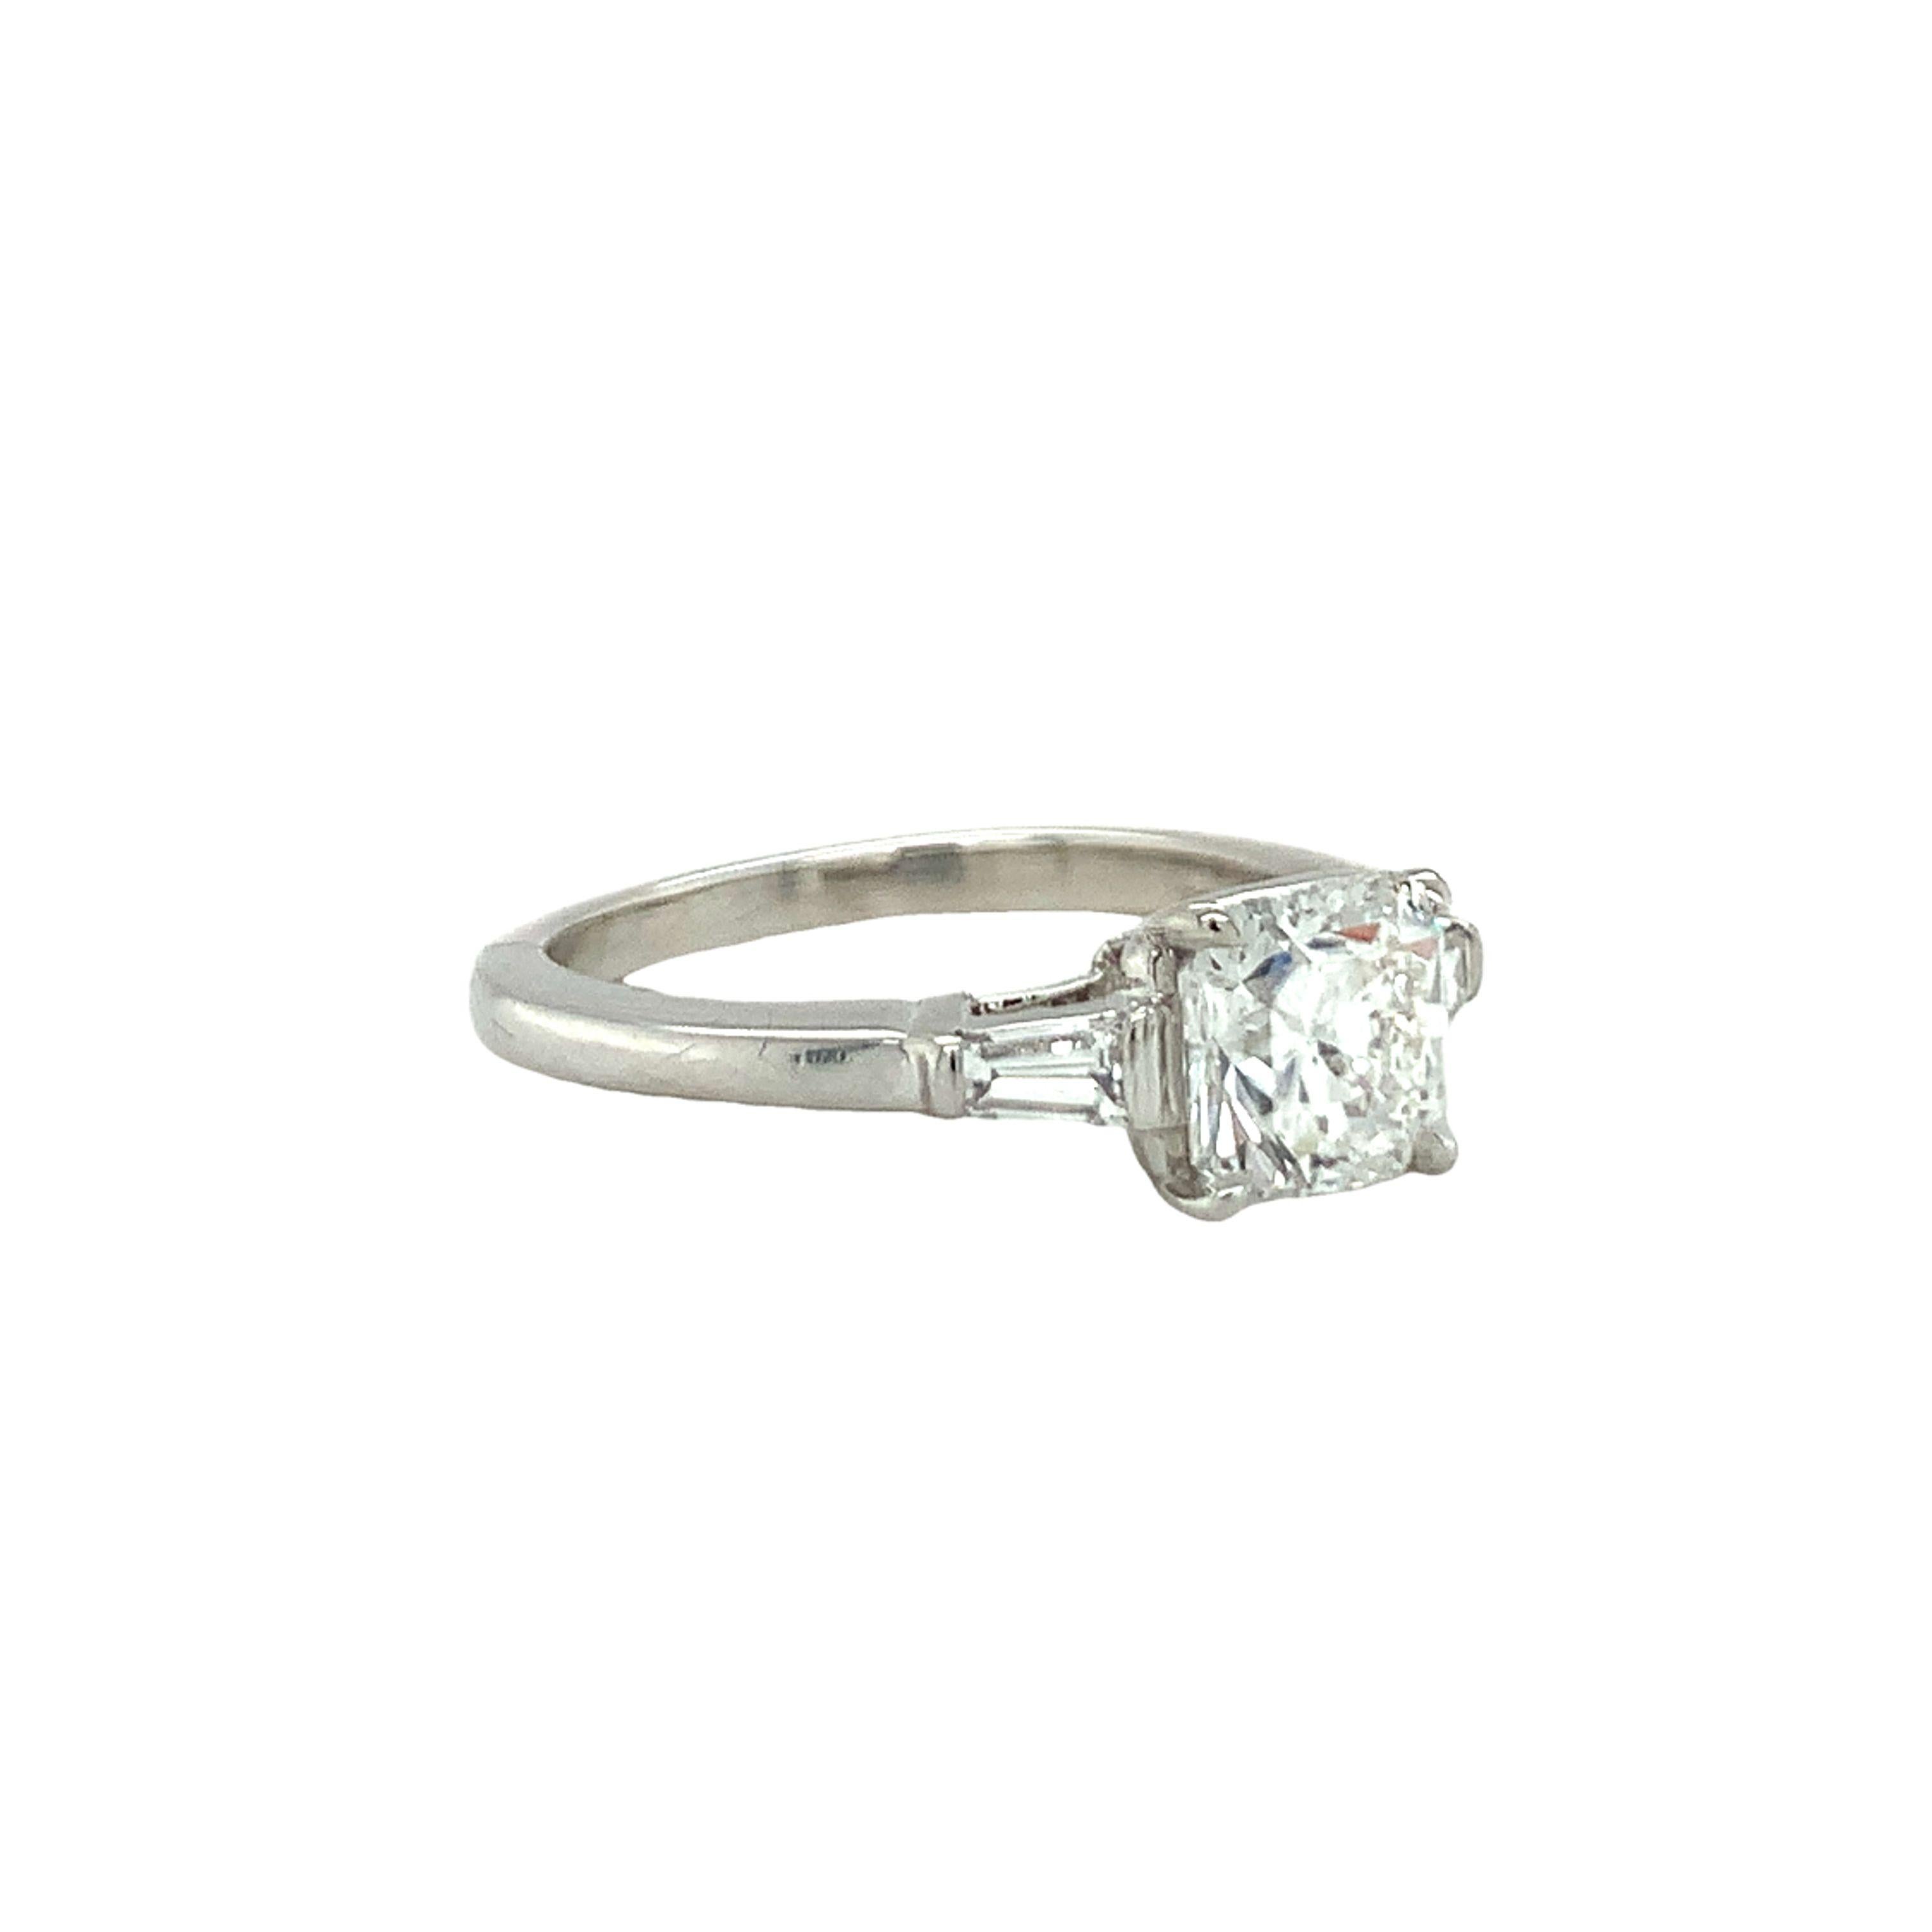 One GIA certified 1.03 ct. Lucida cut diamond platinum engagement ring by Tiffany & Co. with F color and VVS-1 clarity and inscribed Lucida (cut cornered square mixed cut diamond). With two tapered baguette cut diamonds totaling 0.20 ct. with F